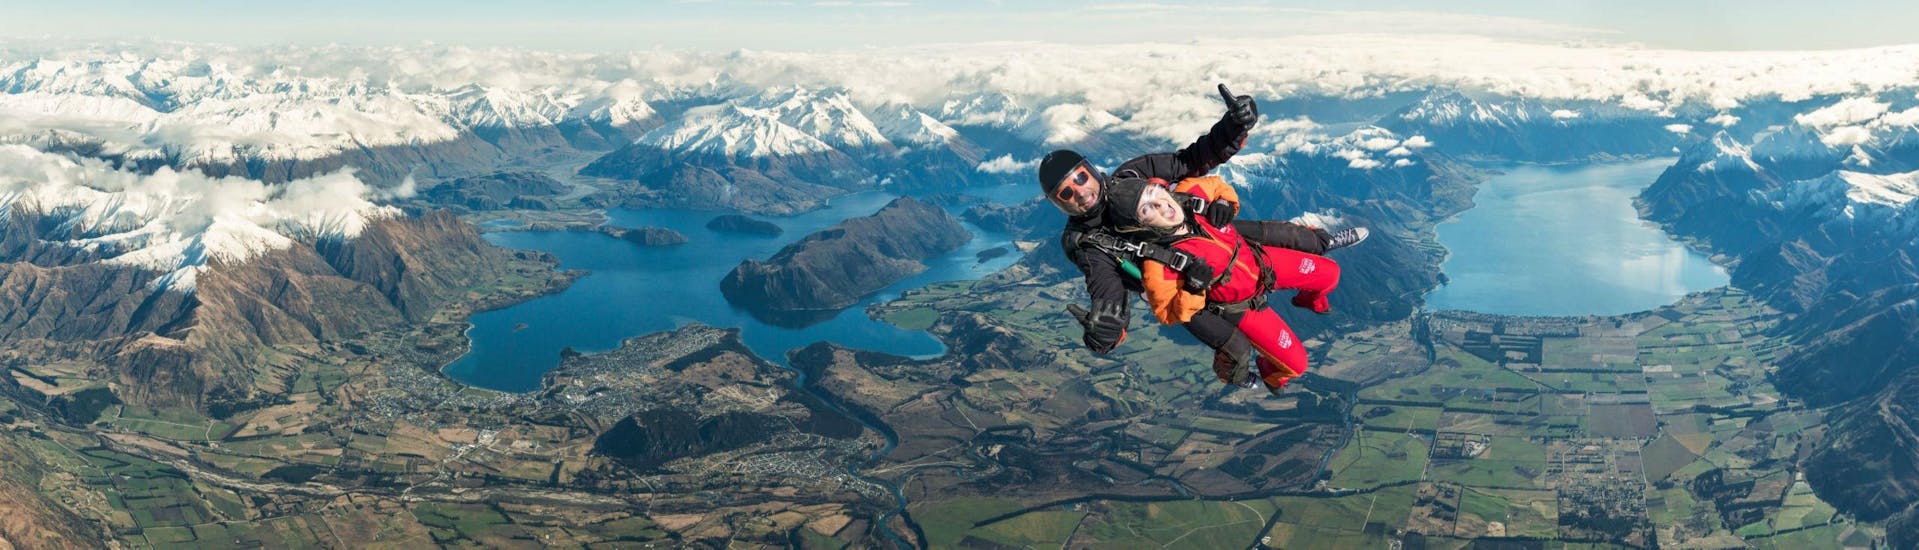 A tandem master from Skydive Wanaka and his passenger are in the middle of their free fall high above the spectacular mountainscape around Lake Wanaka.